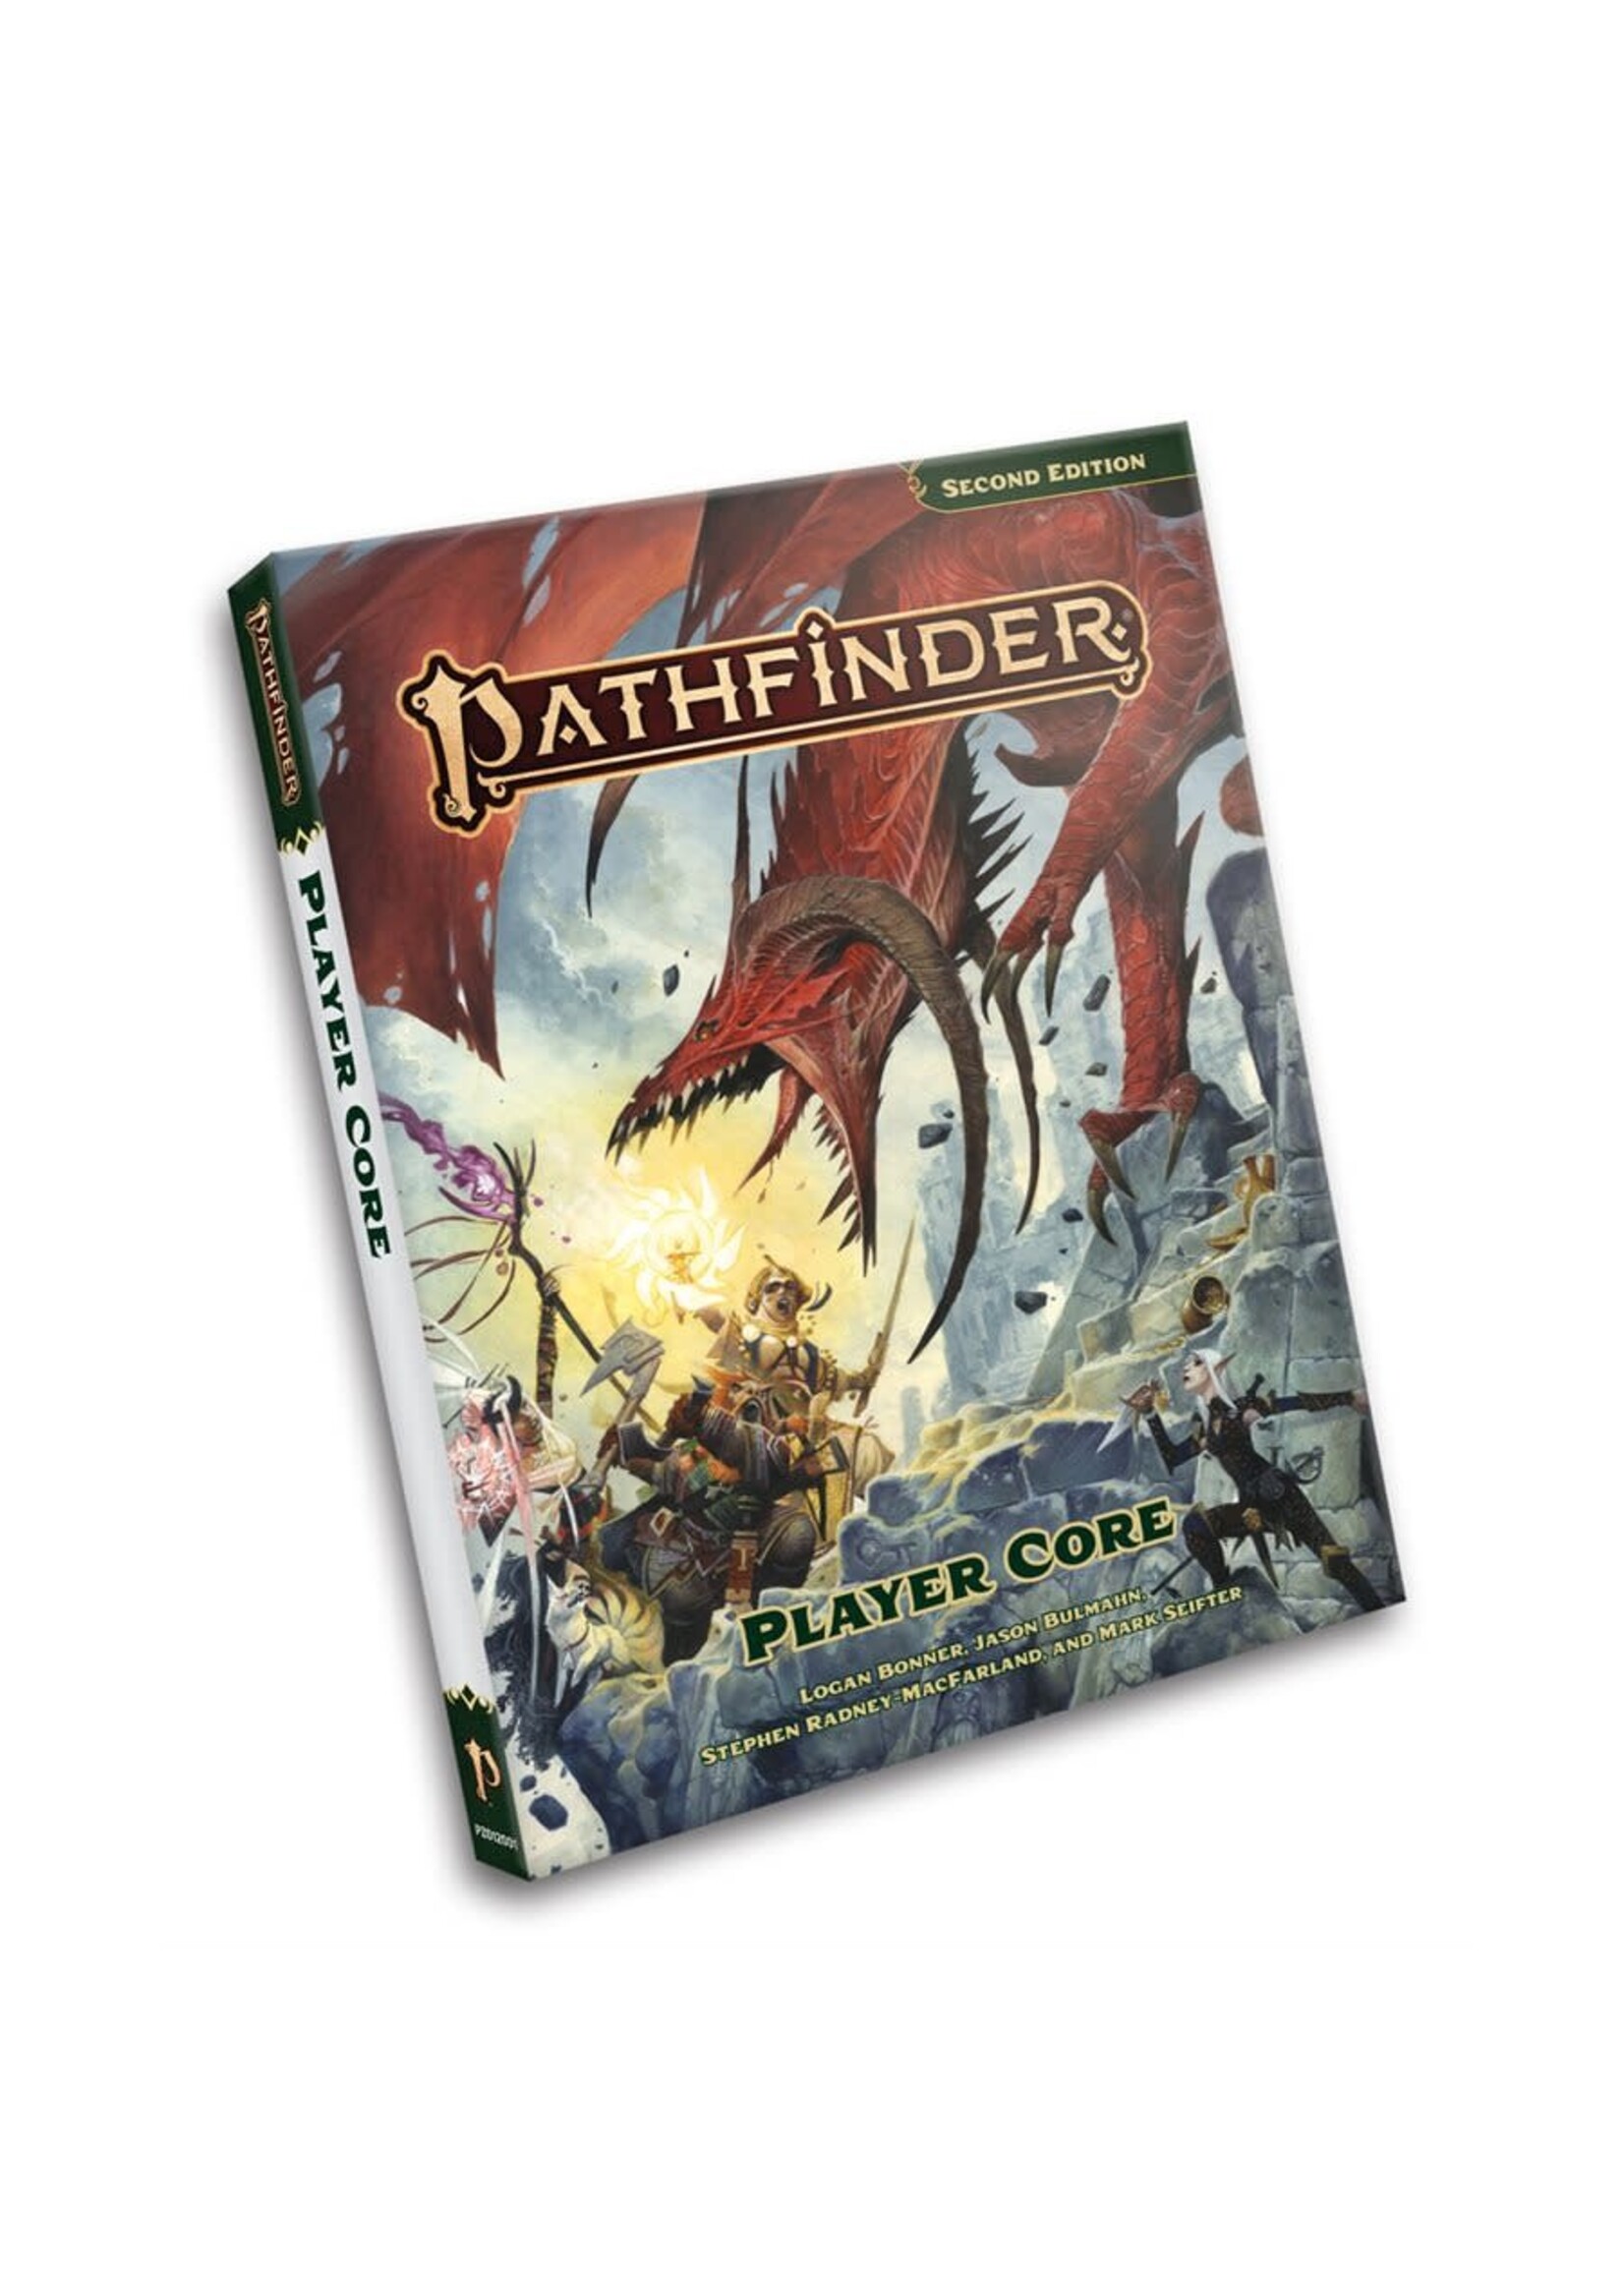 PATHFINDER 2E PLAYER CORE POCKET EDITION (REMASTERED)